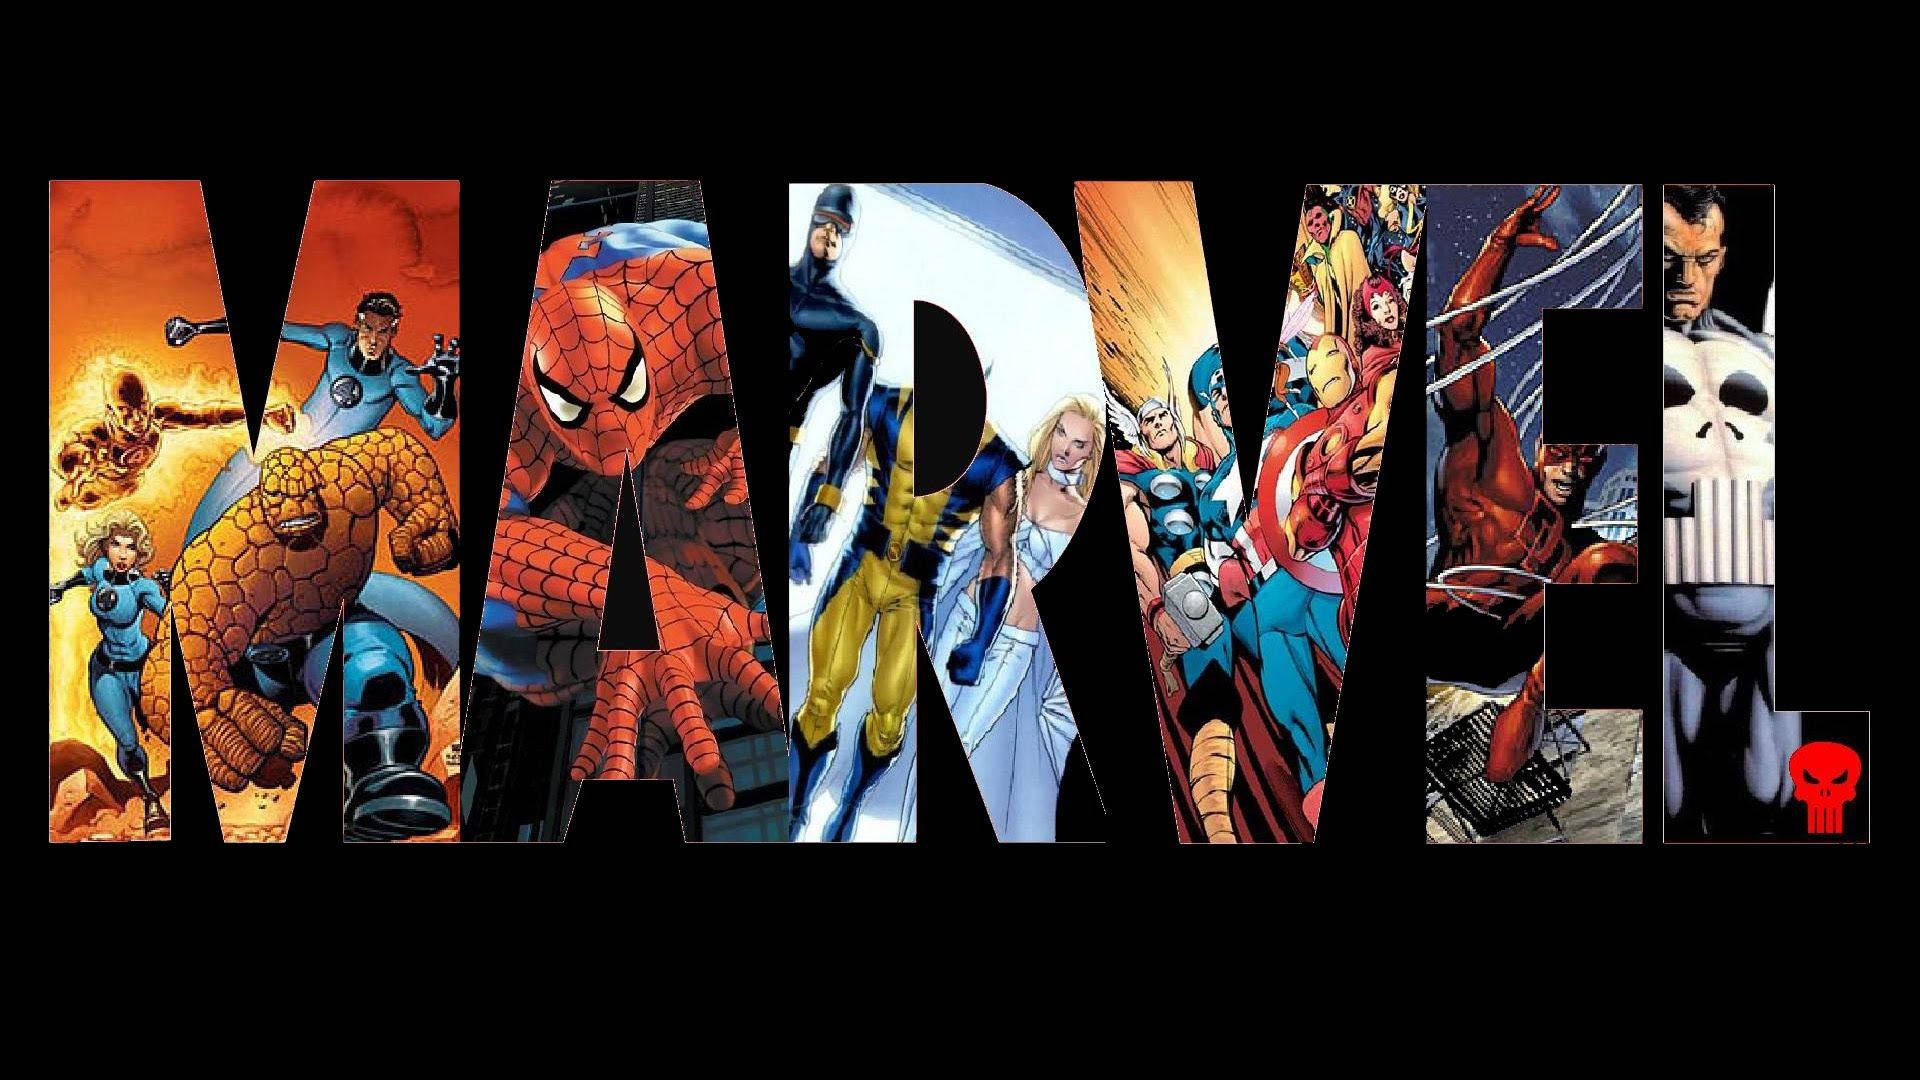 Marvel Superheroes Caption American, Wolverine, Spiderman and others.